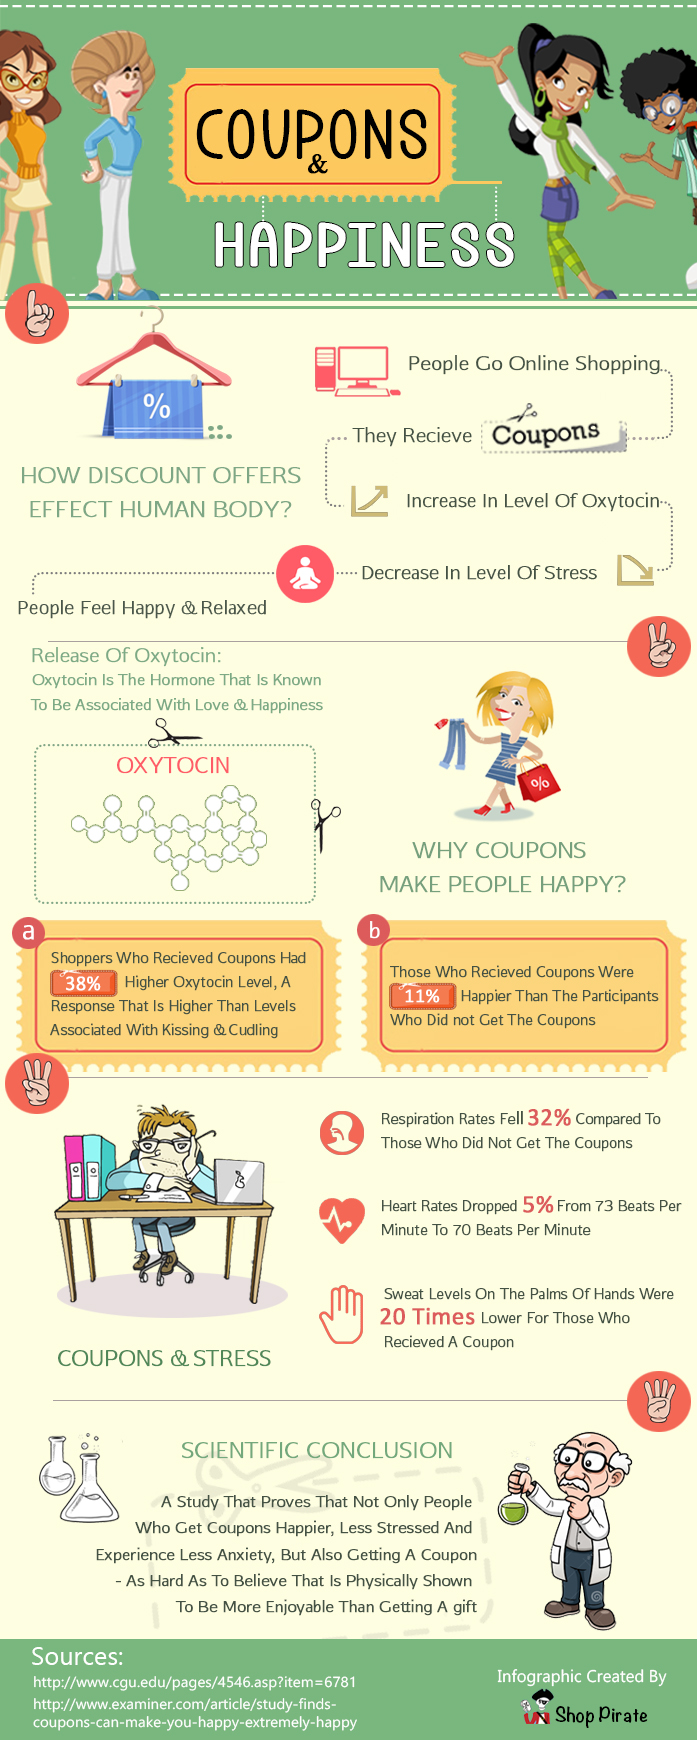 Why Coupons Make People Happy1